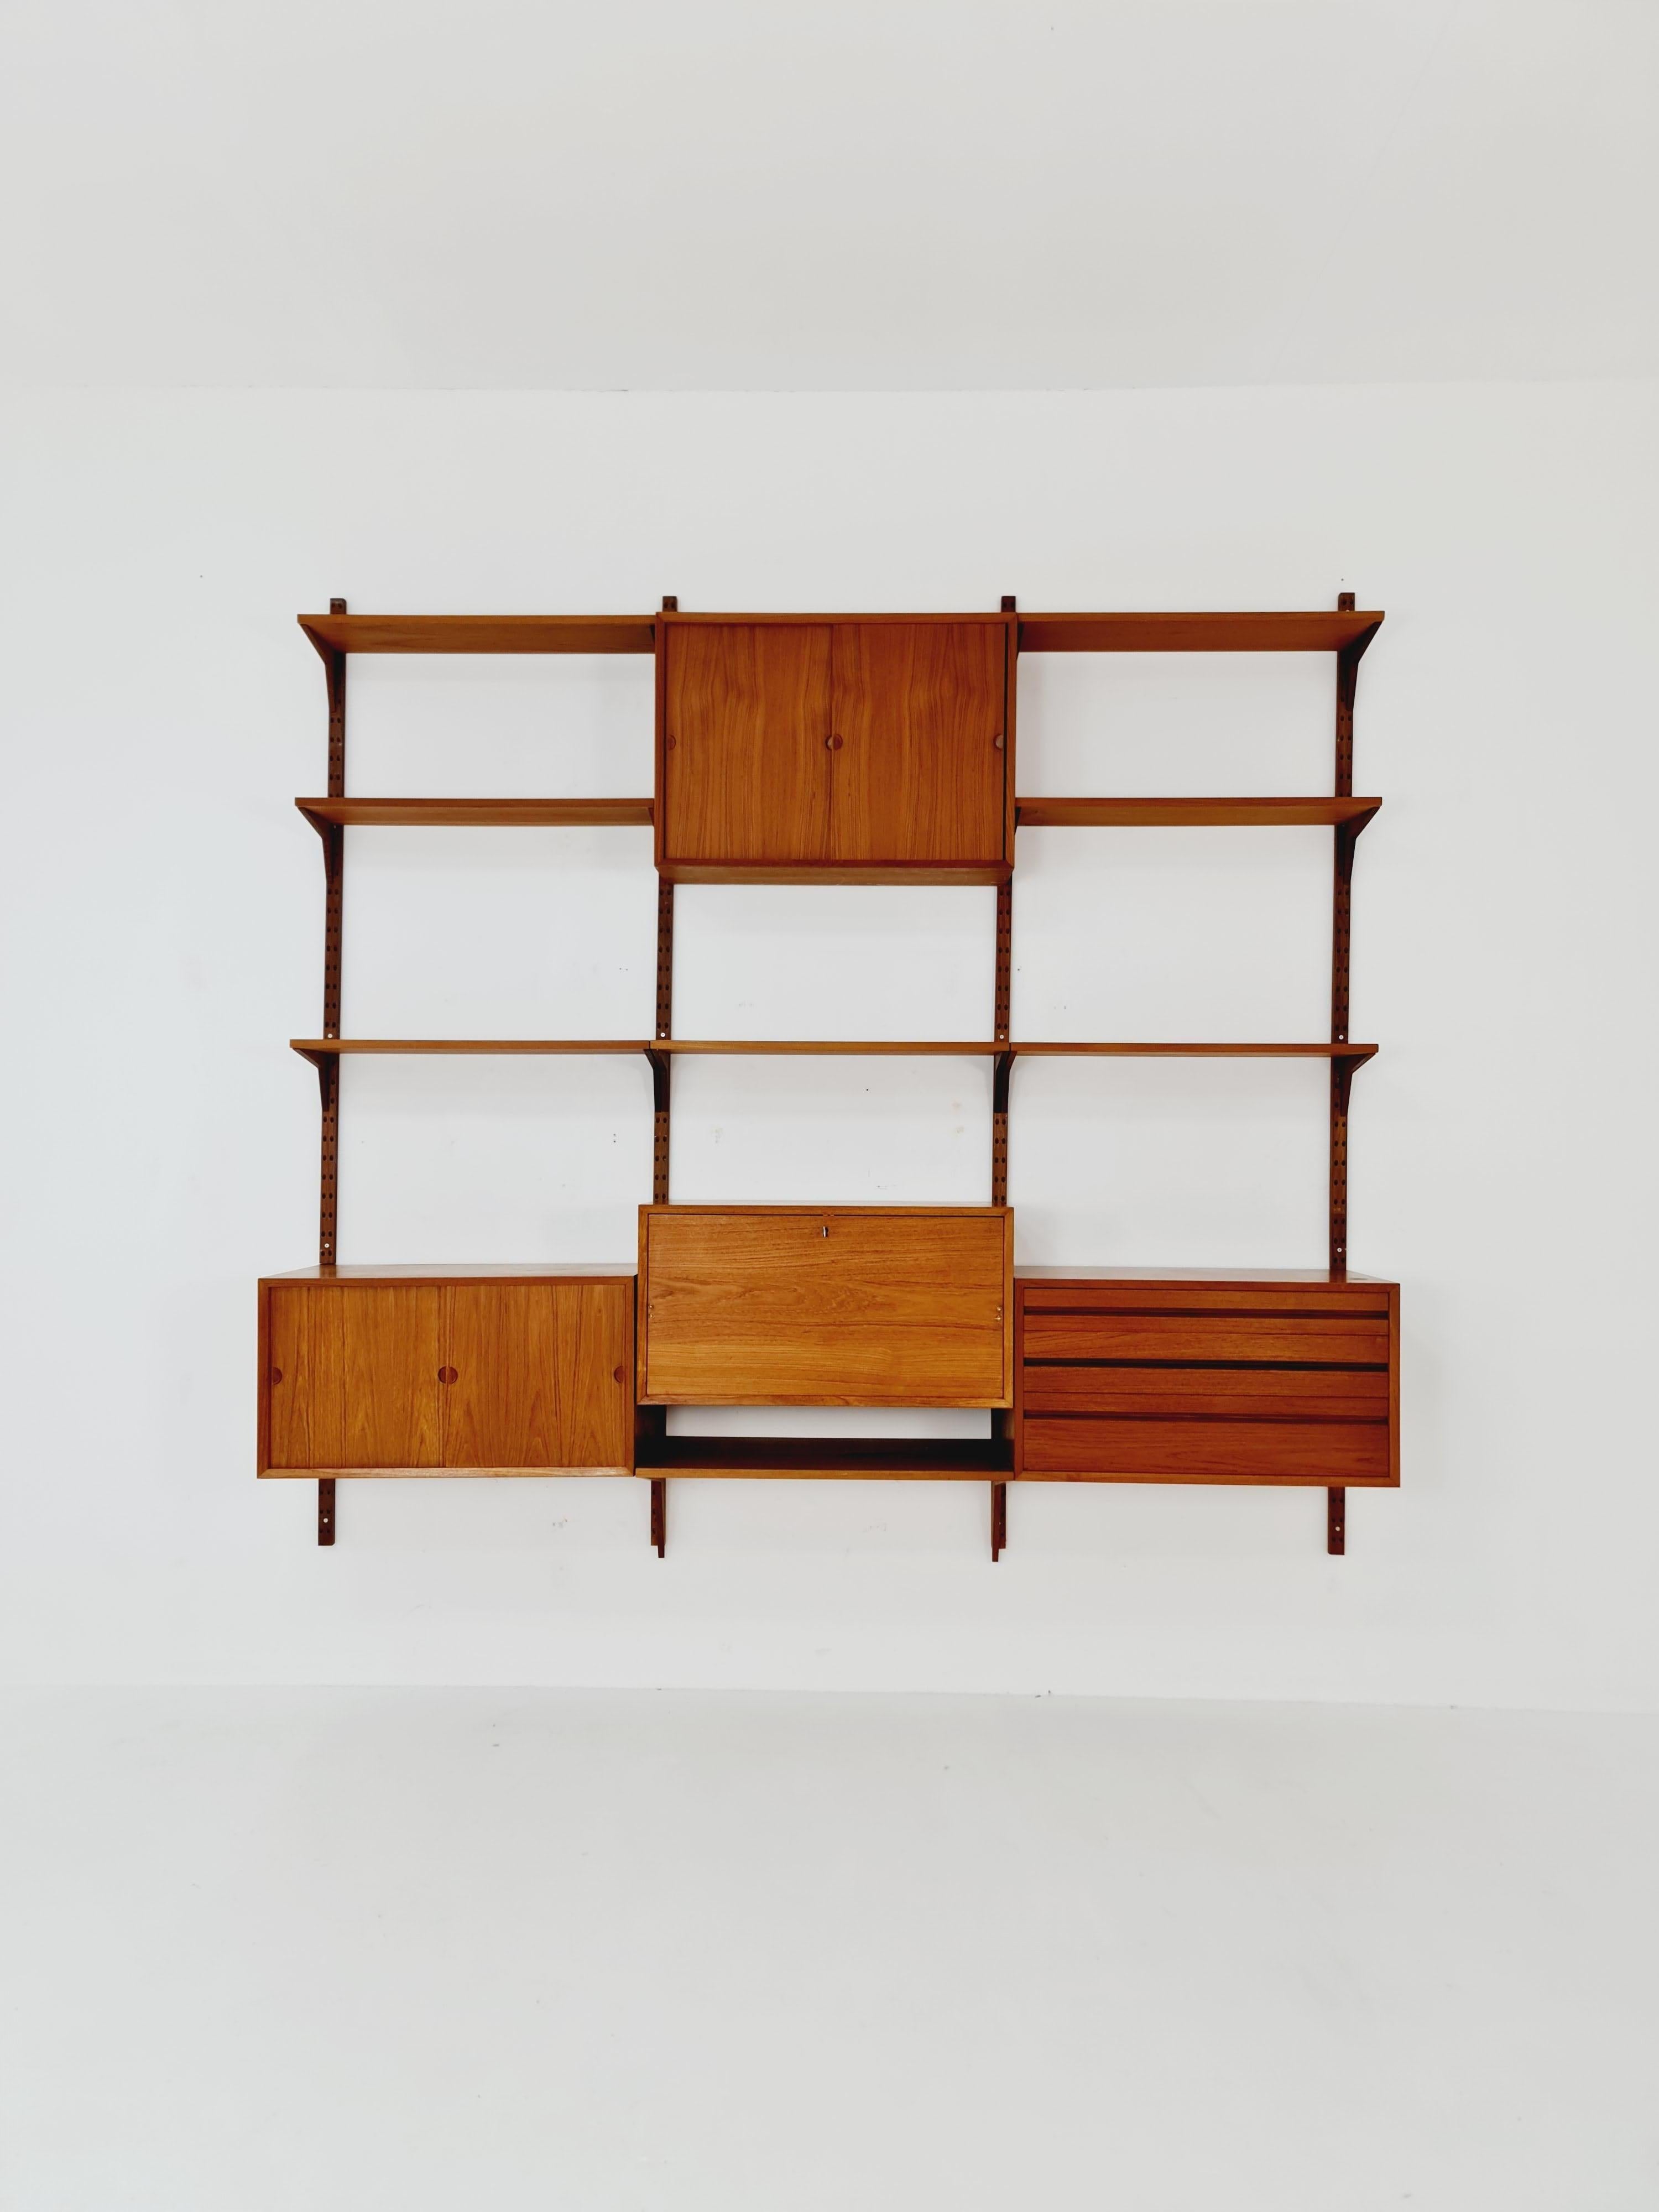 Big Mid century Danish Teak Wall Unit with 3 cabinets & secretary  cabient  by Poul Cadovius for Cado, Denmark, 1960s

Danish design by Poul Cadovius

Design year: 1960s

Dimensions: :  40 D x 240 W x 238H cm 

It is in mint condition, however, as